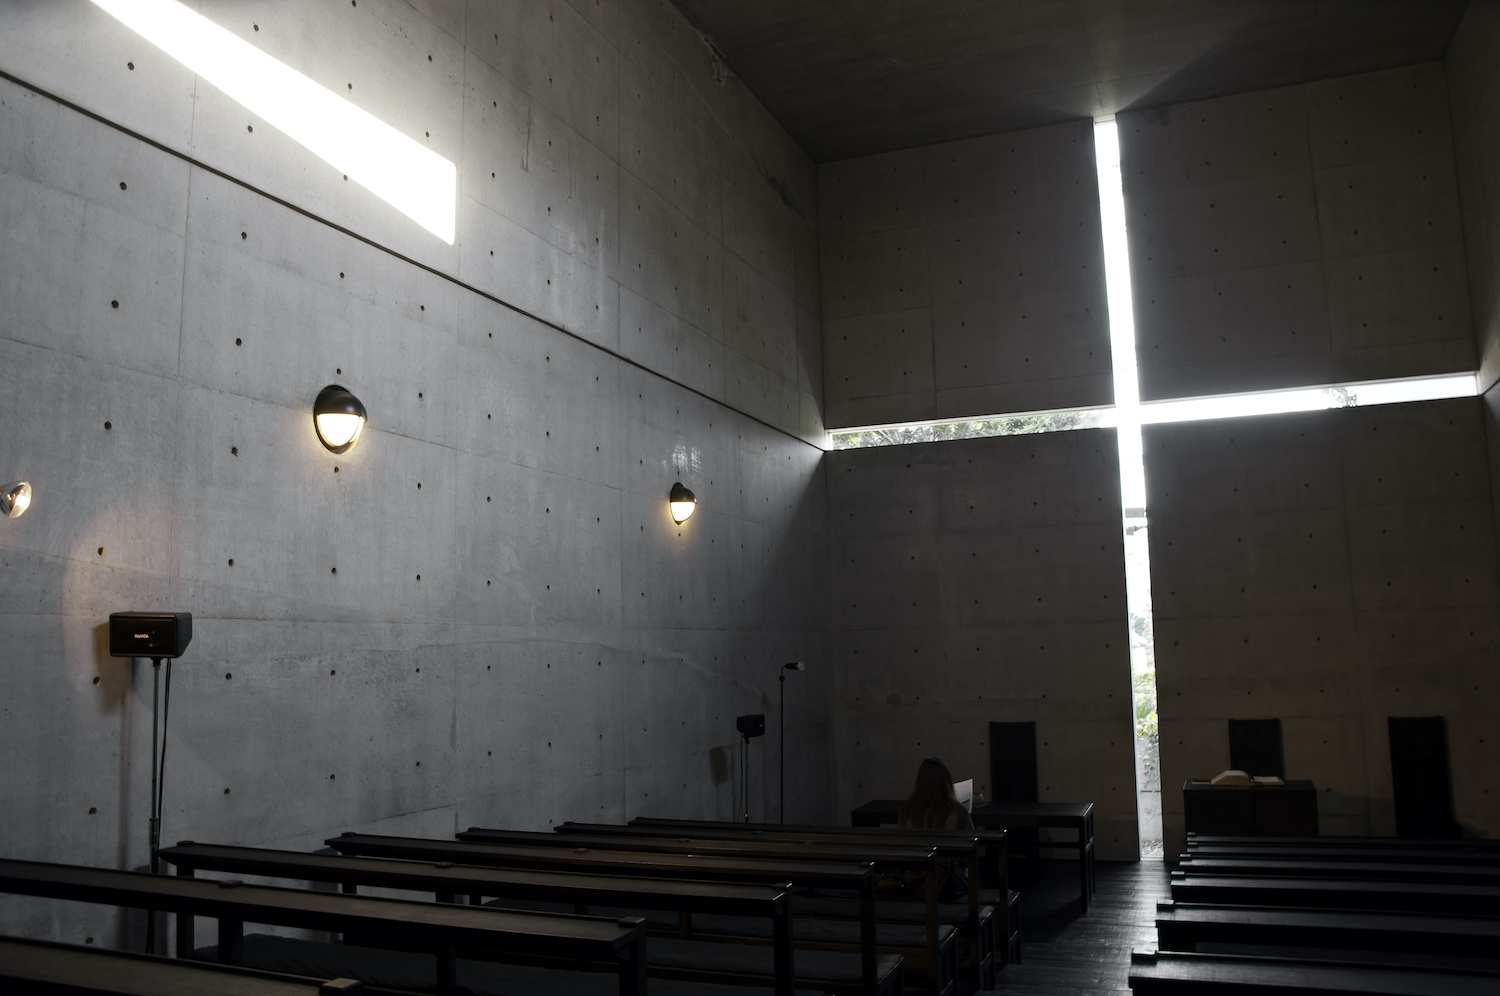 Church of the light designed by Tadao Ando(sometimes called "Church with Light") is the Ibaraki Kasugaoka Church's main chapel. It was built in 1989, in the city of Ibaraki, Osaka Prefecture.